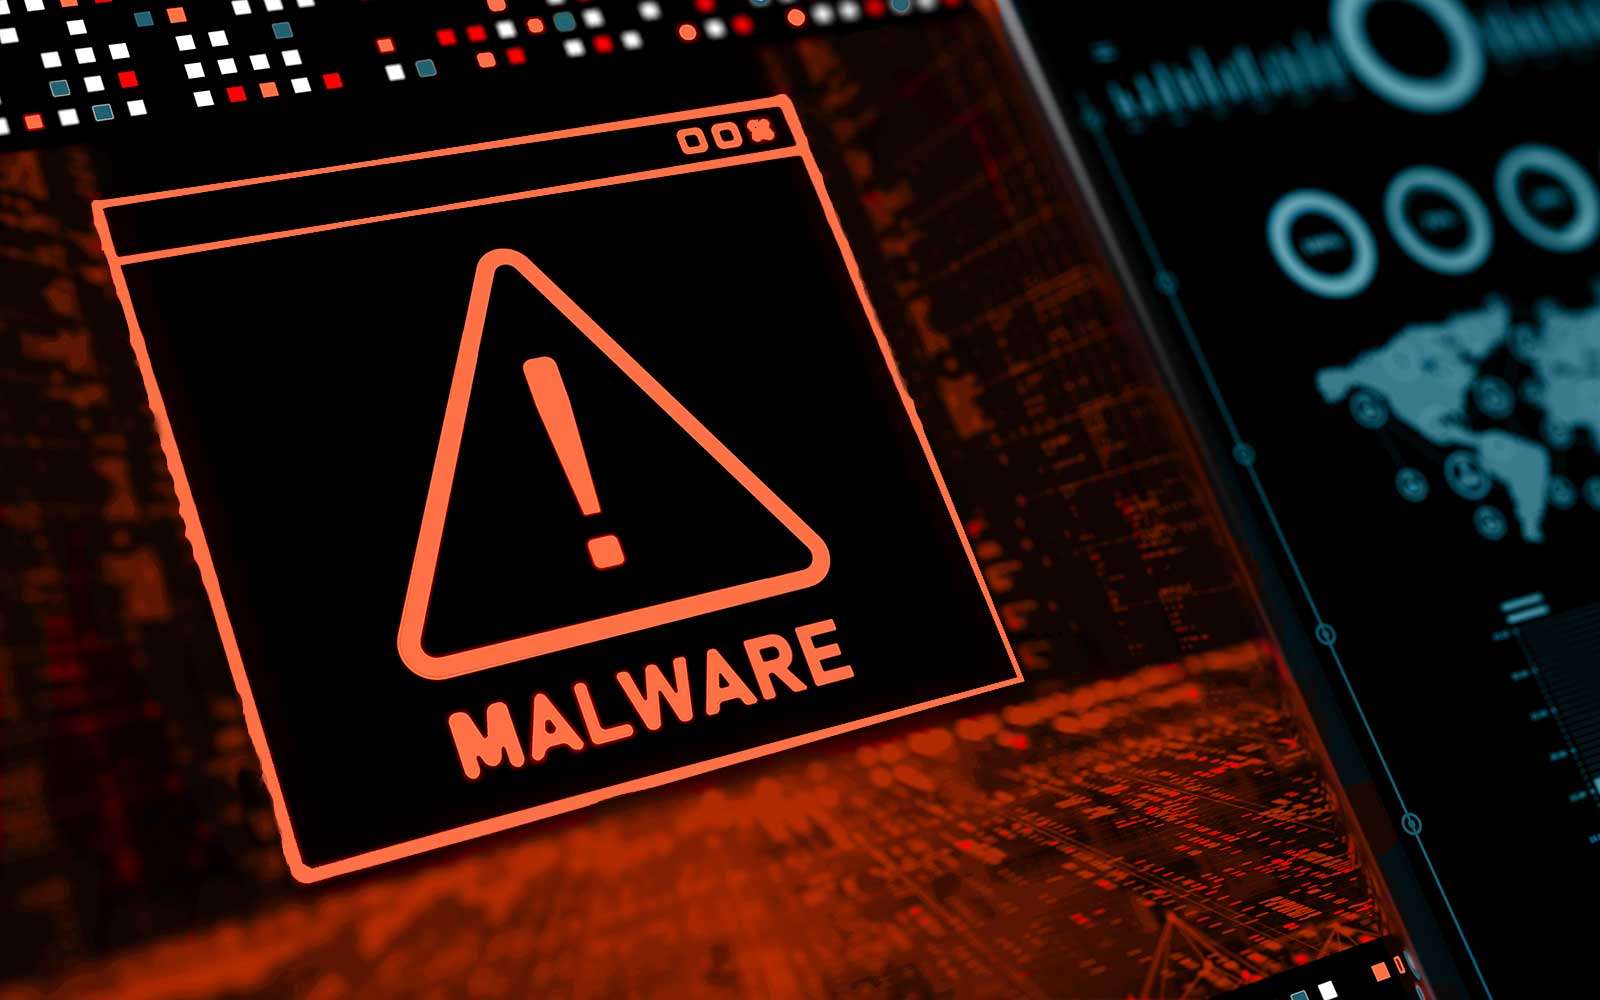 How Do You Get Malware? 5 Malware Infection Methods to Avoid